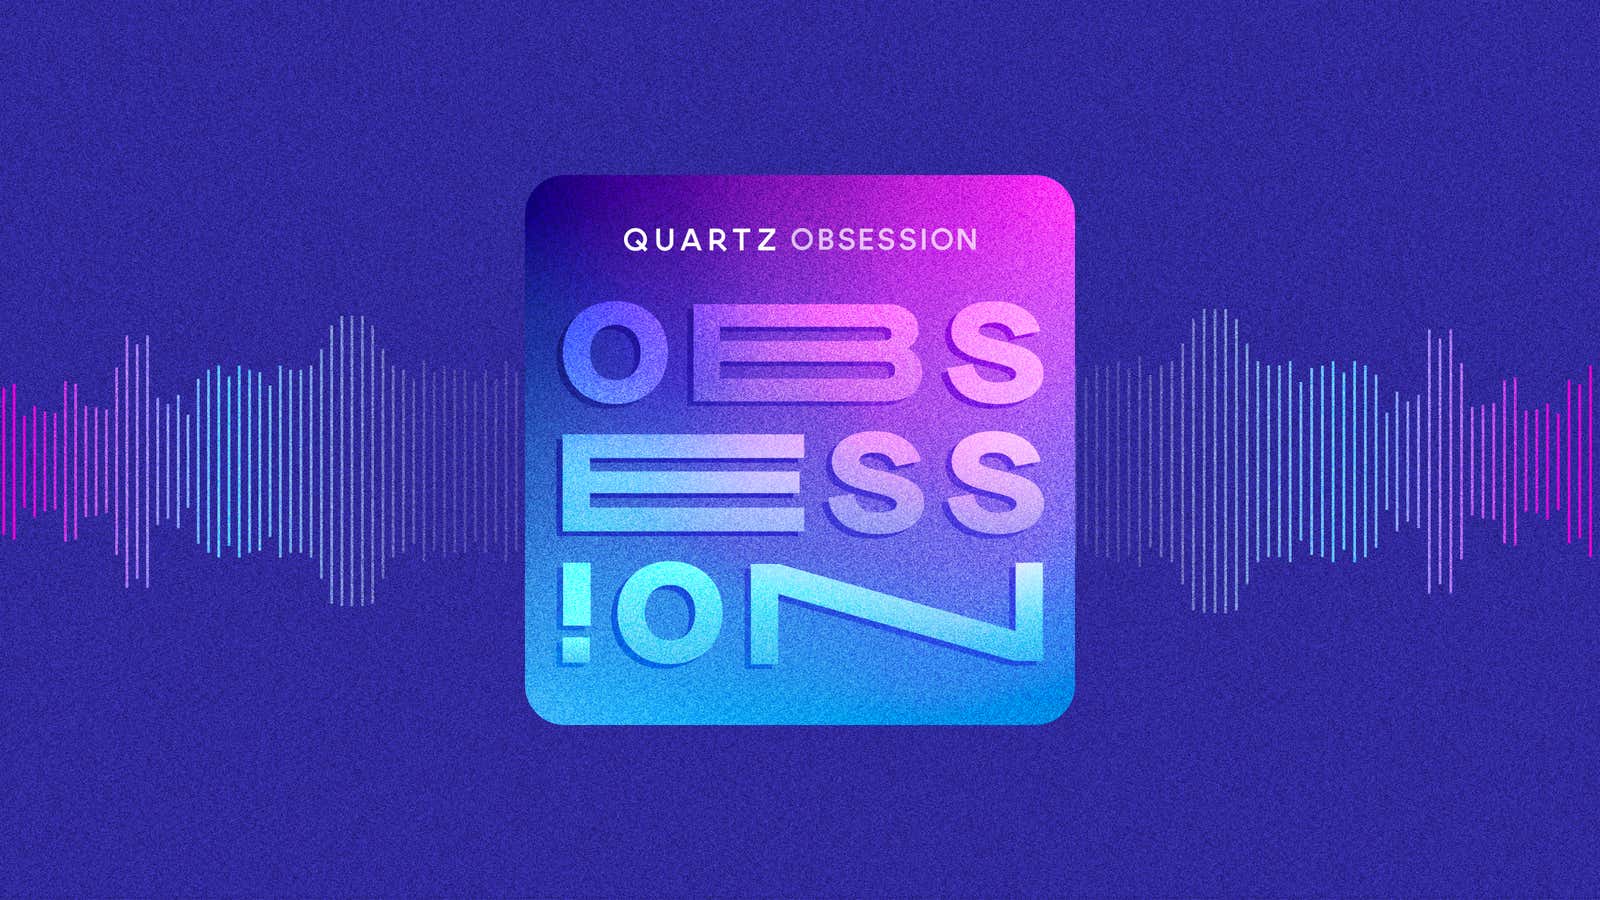 Join us for Season 3 of the Quartz Obsession podcast